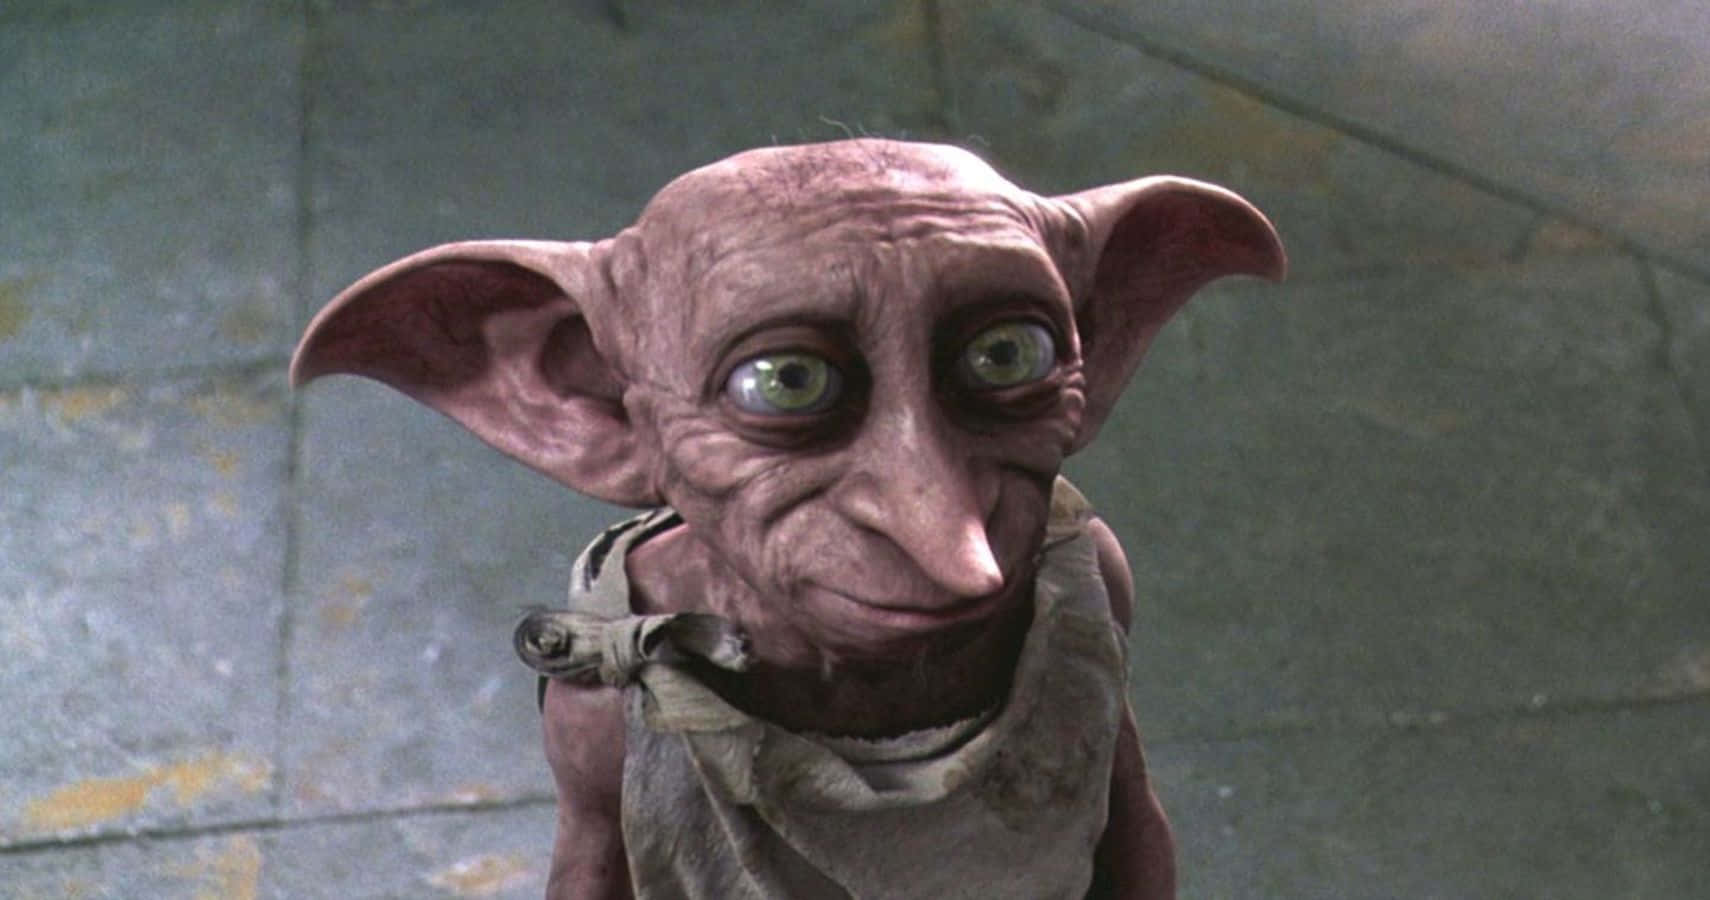 "Here's Dobby, a free elf from 'Harry Potter'" Wallpaper